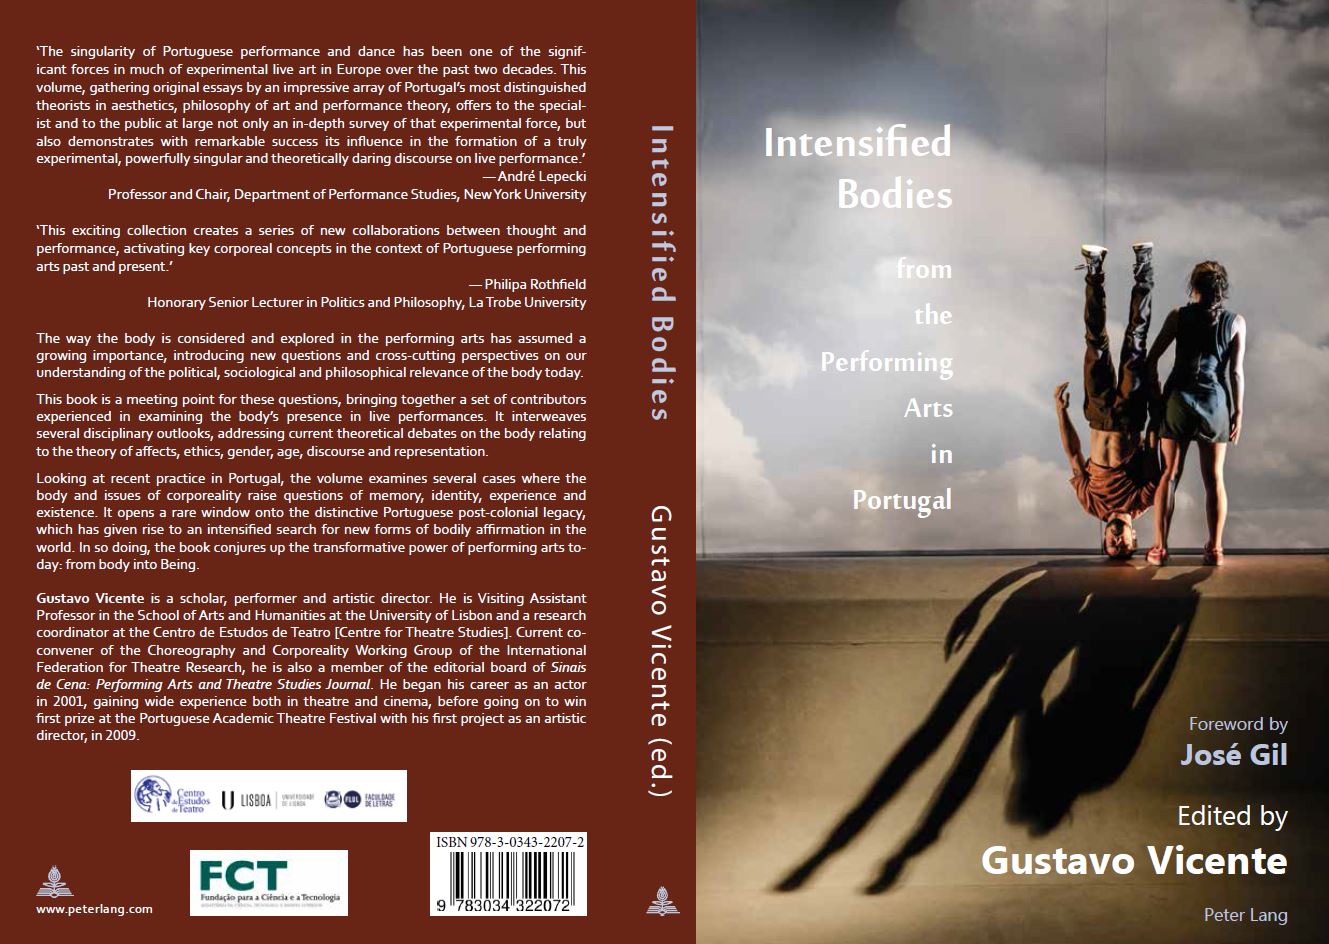 Intensified Bodies: From the Performing Arts in Portugal